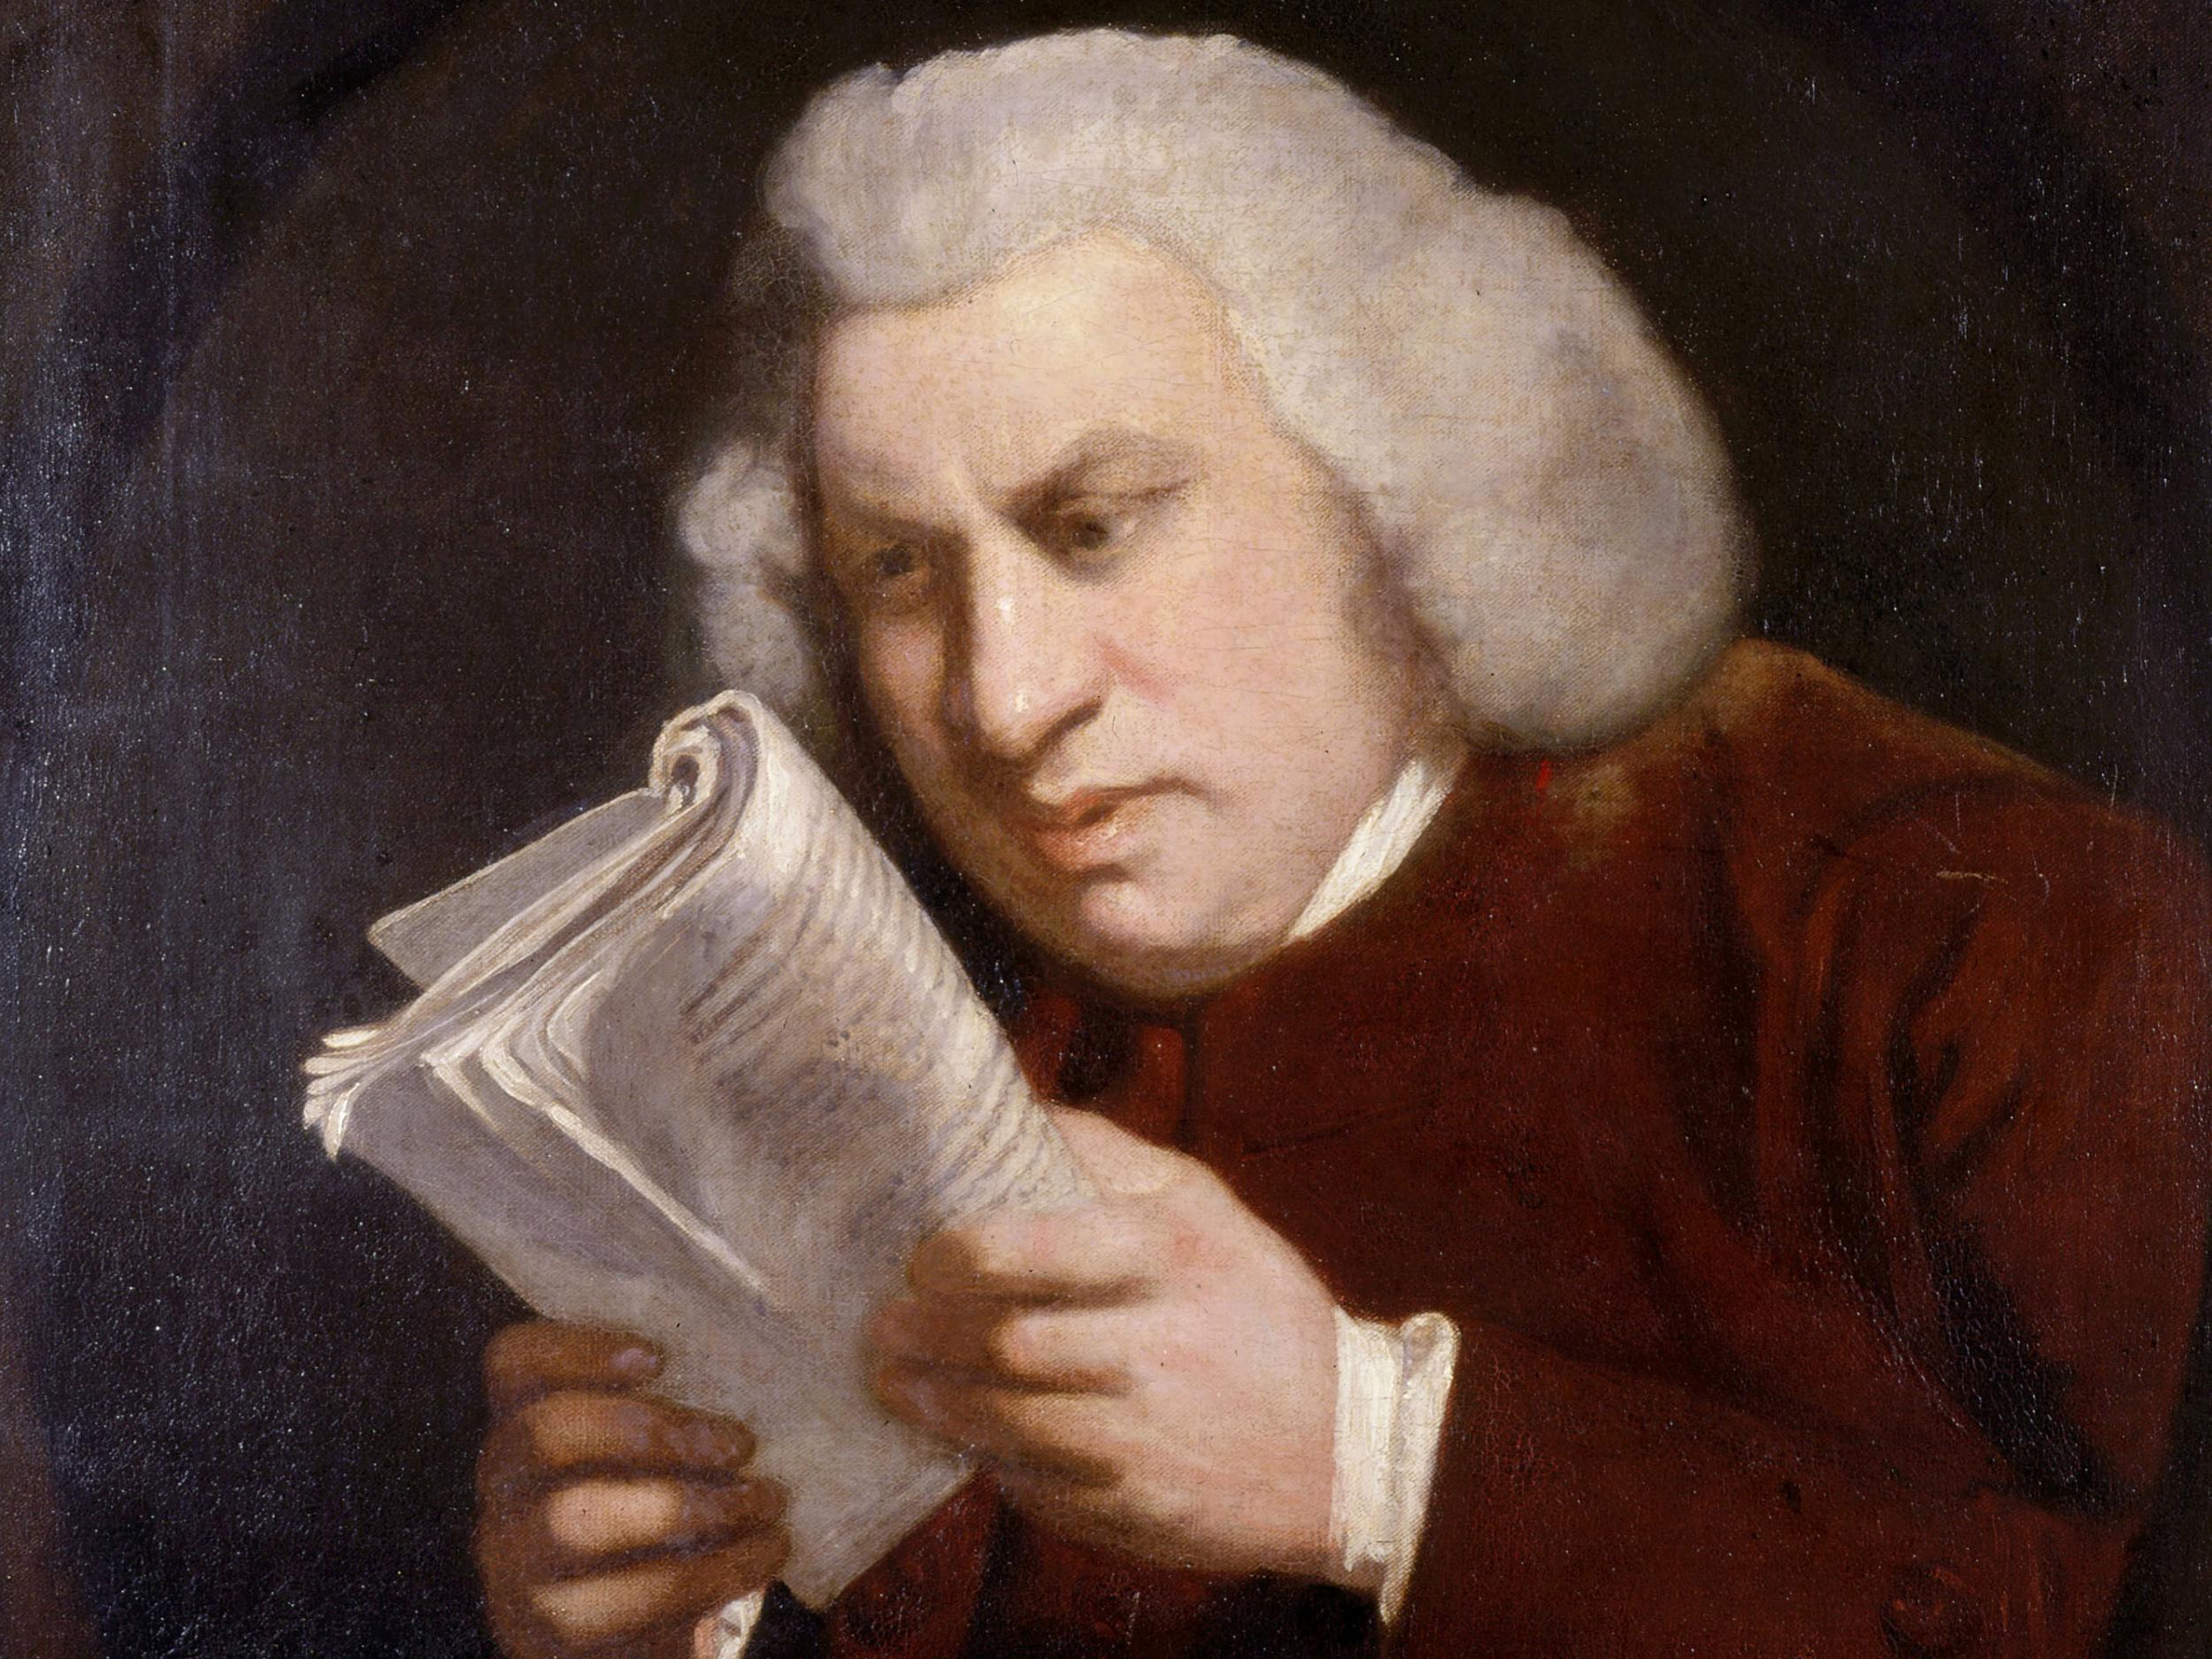 Samuel Johnson Who Was He And Why Is He So Important To The English